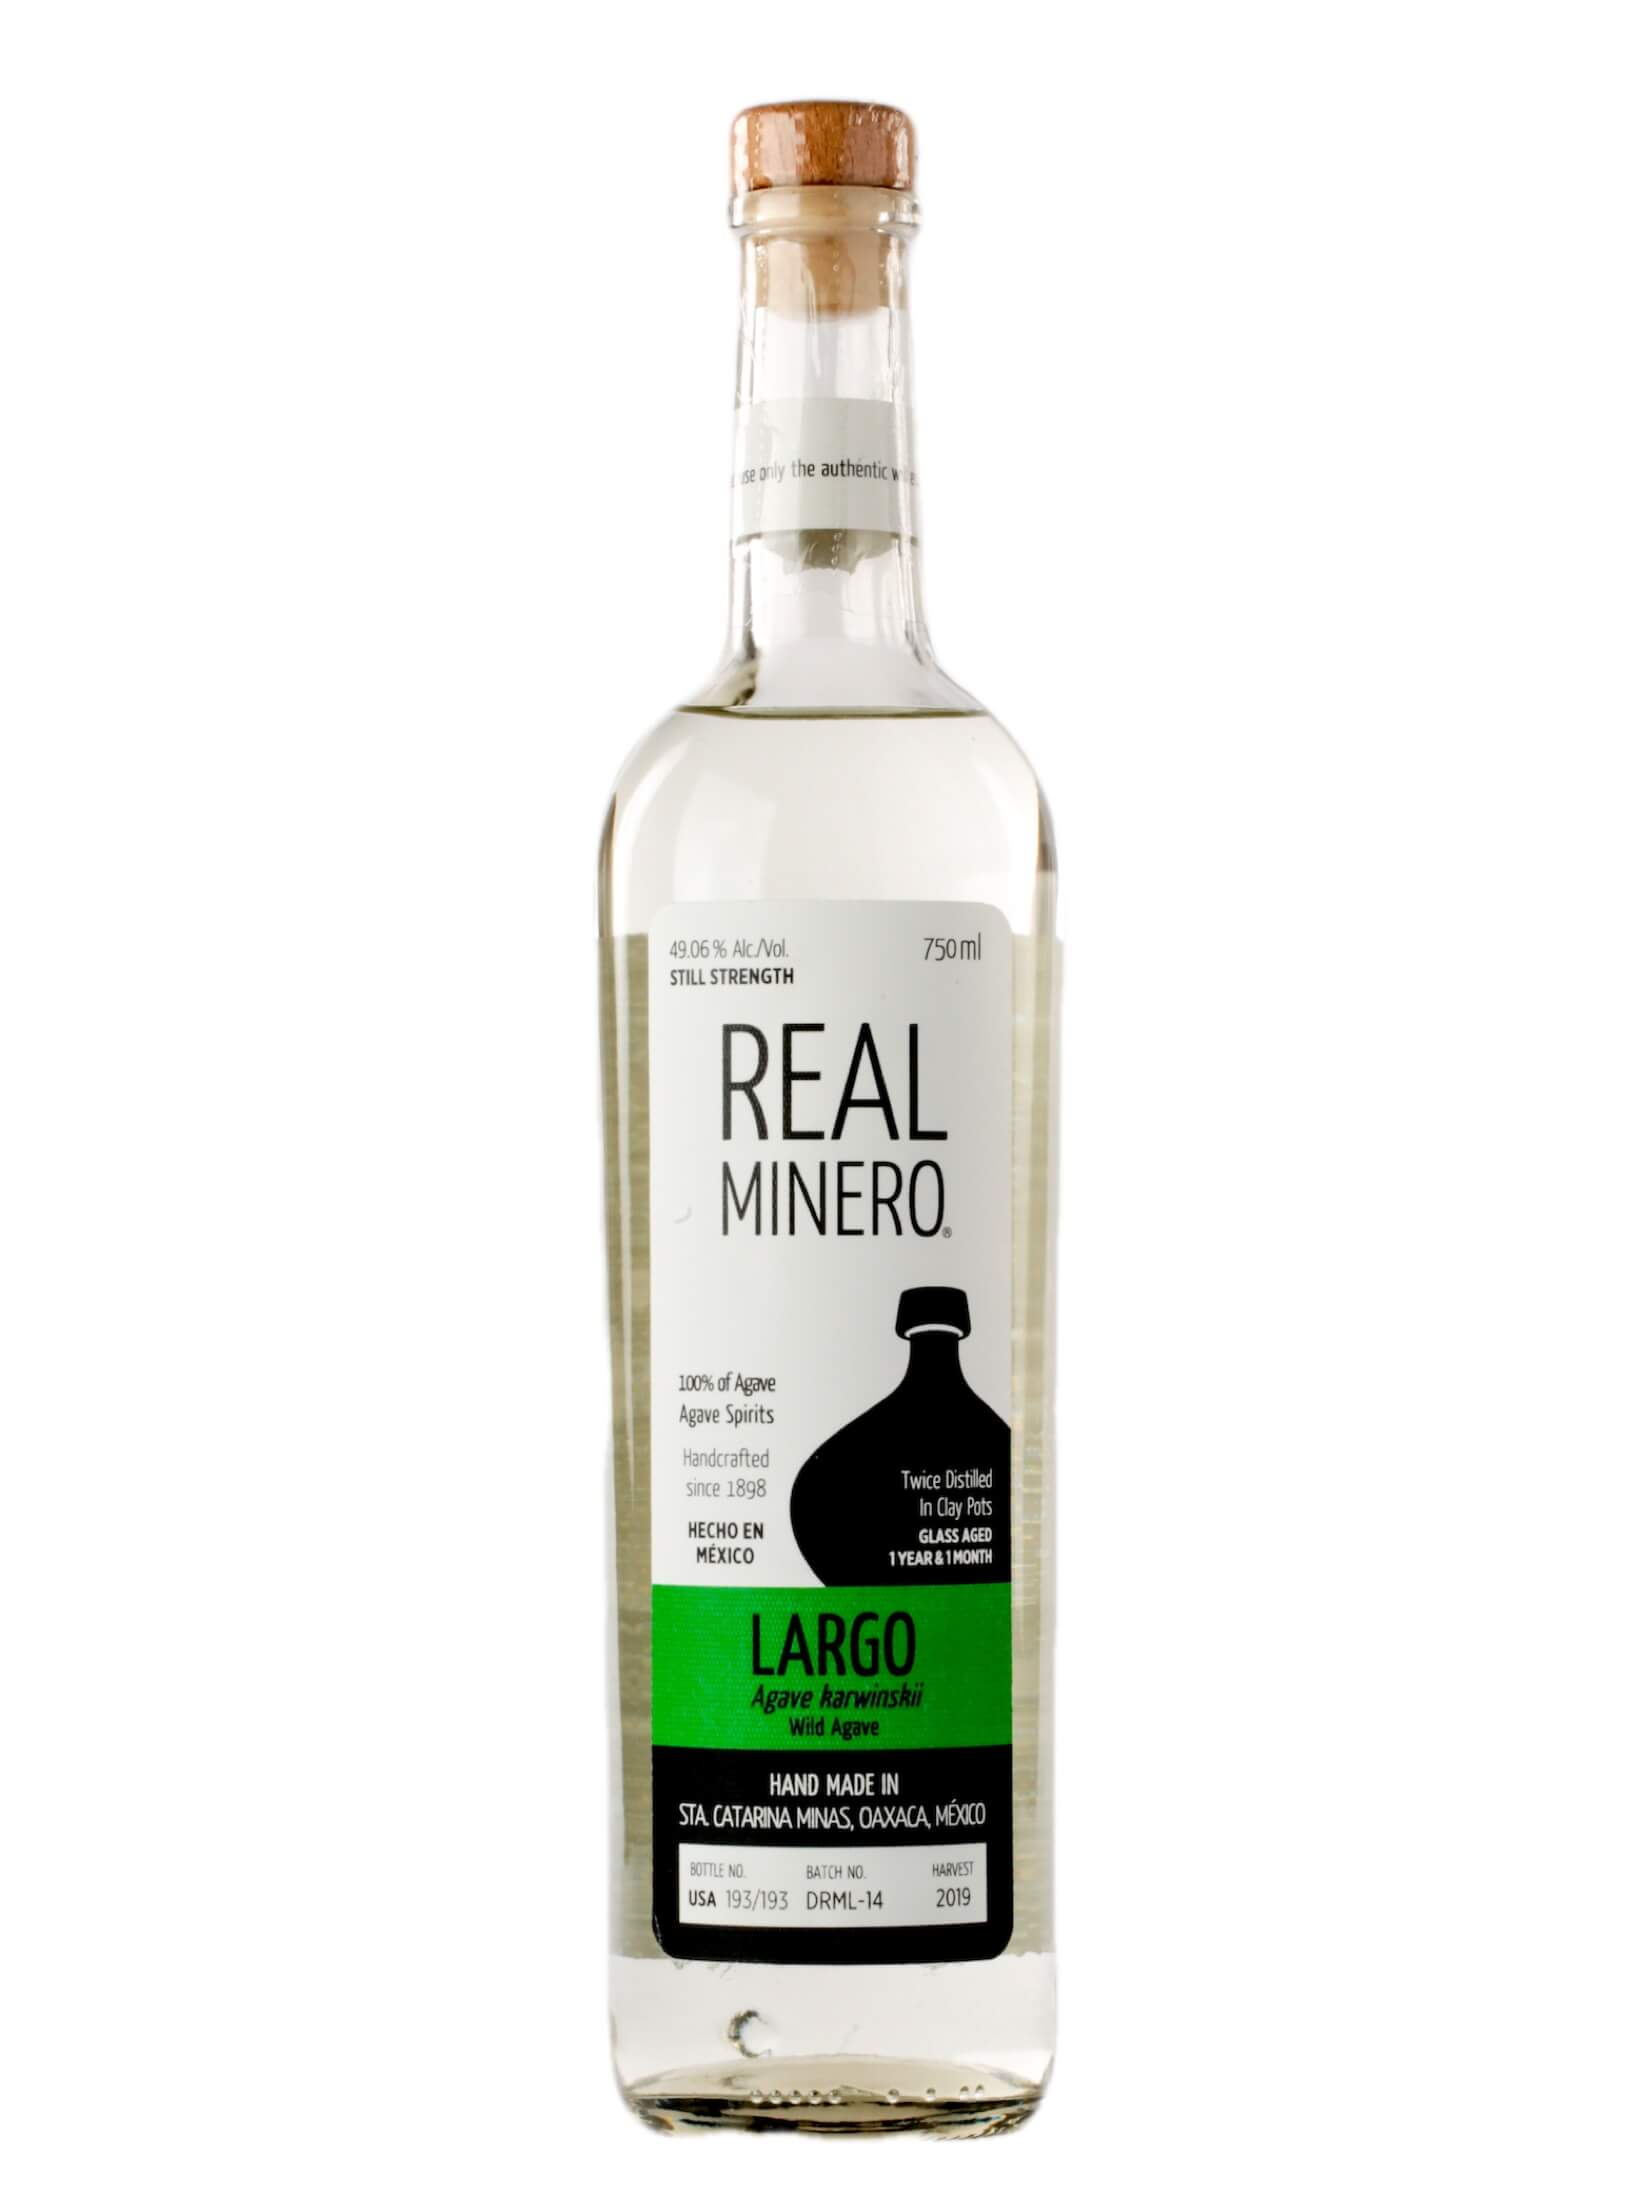 Real Minero Largo 750mL a tall slender clear glass bottle with a white and green label with a wooden top